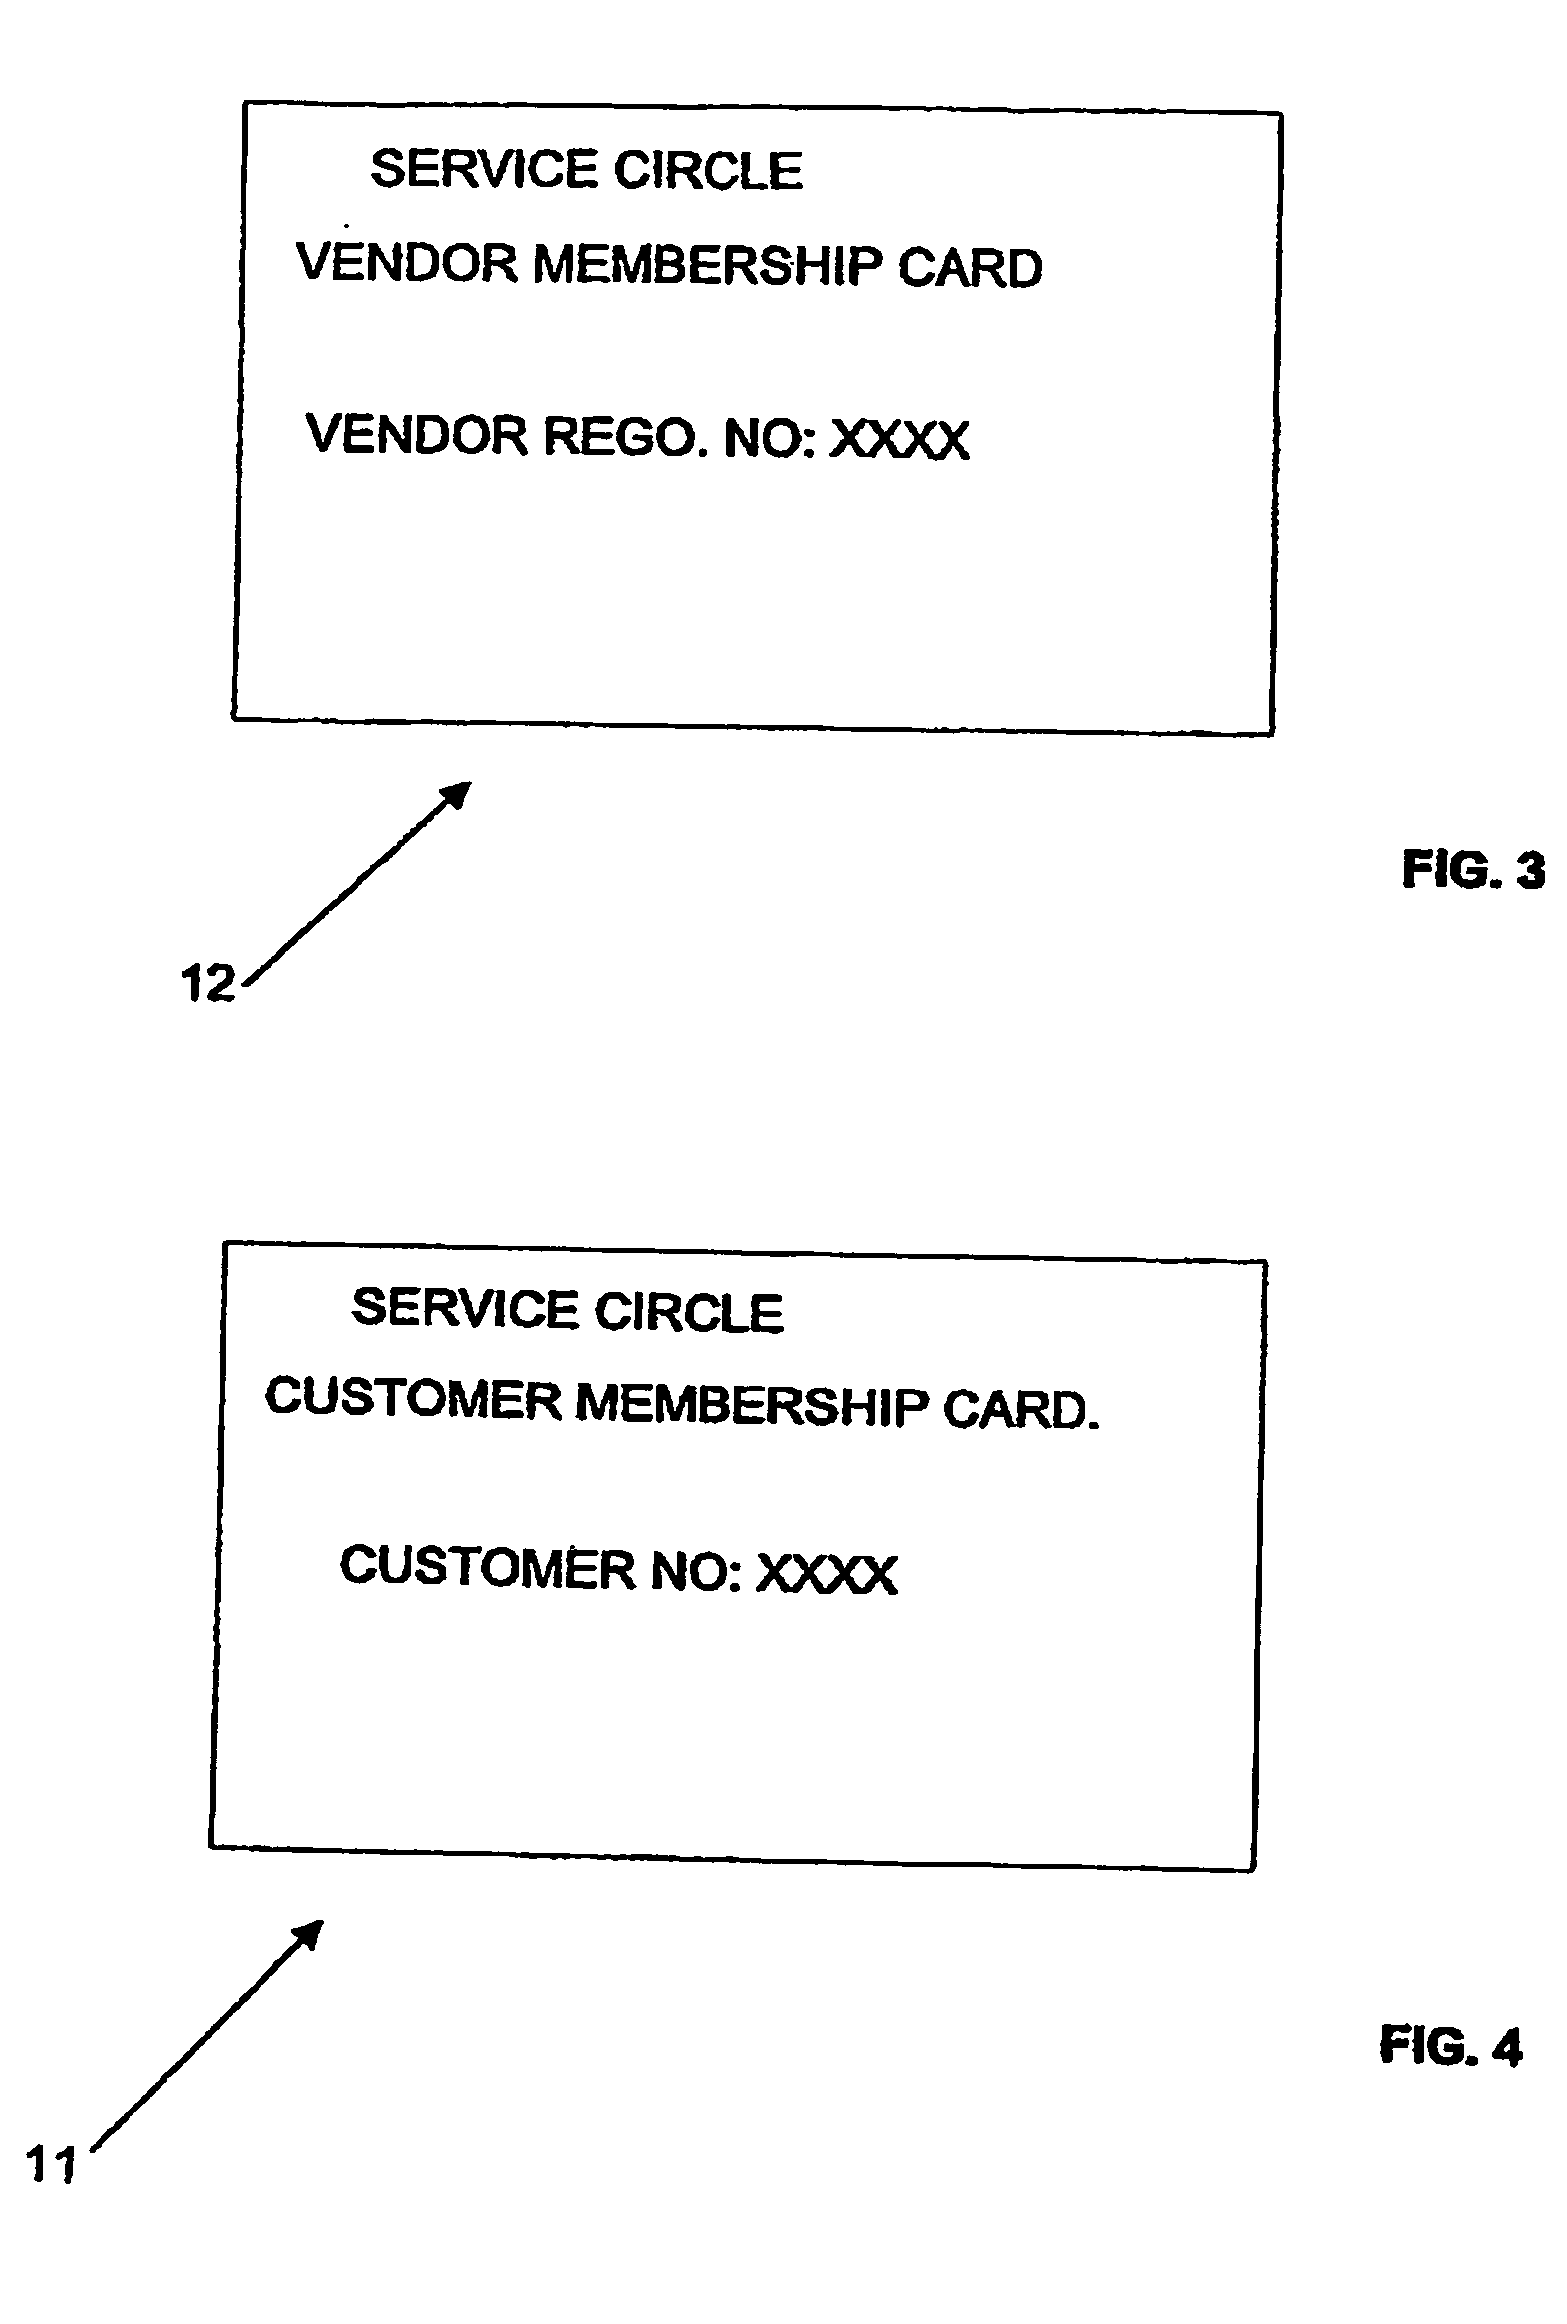 Method of providing incentives to customers